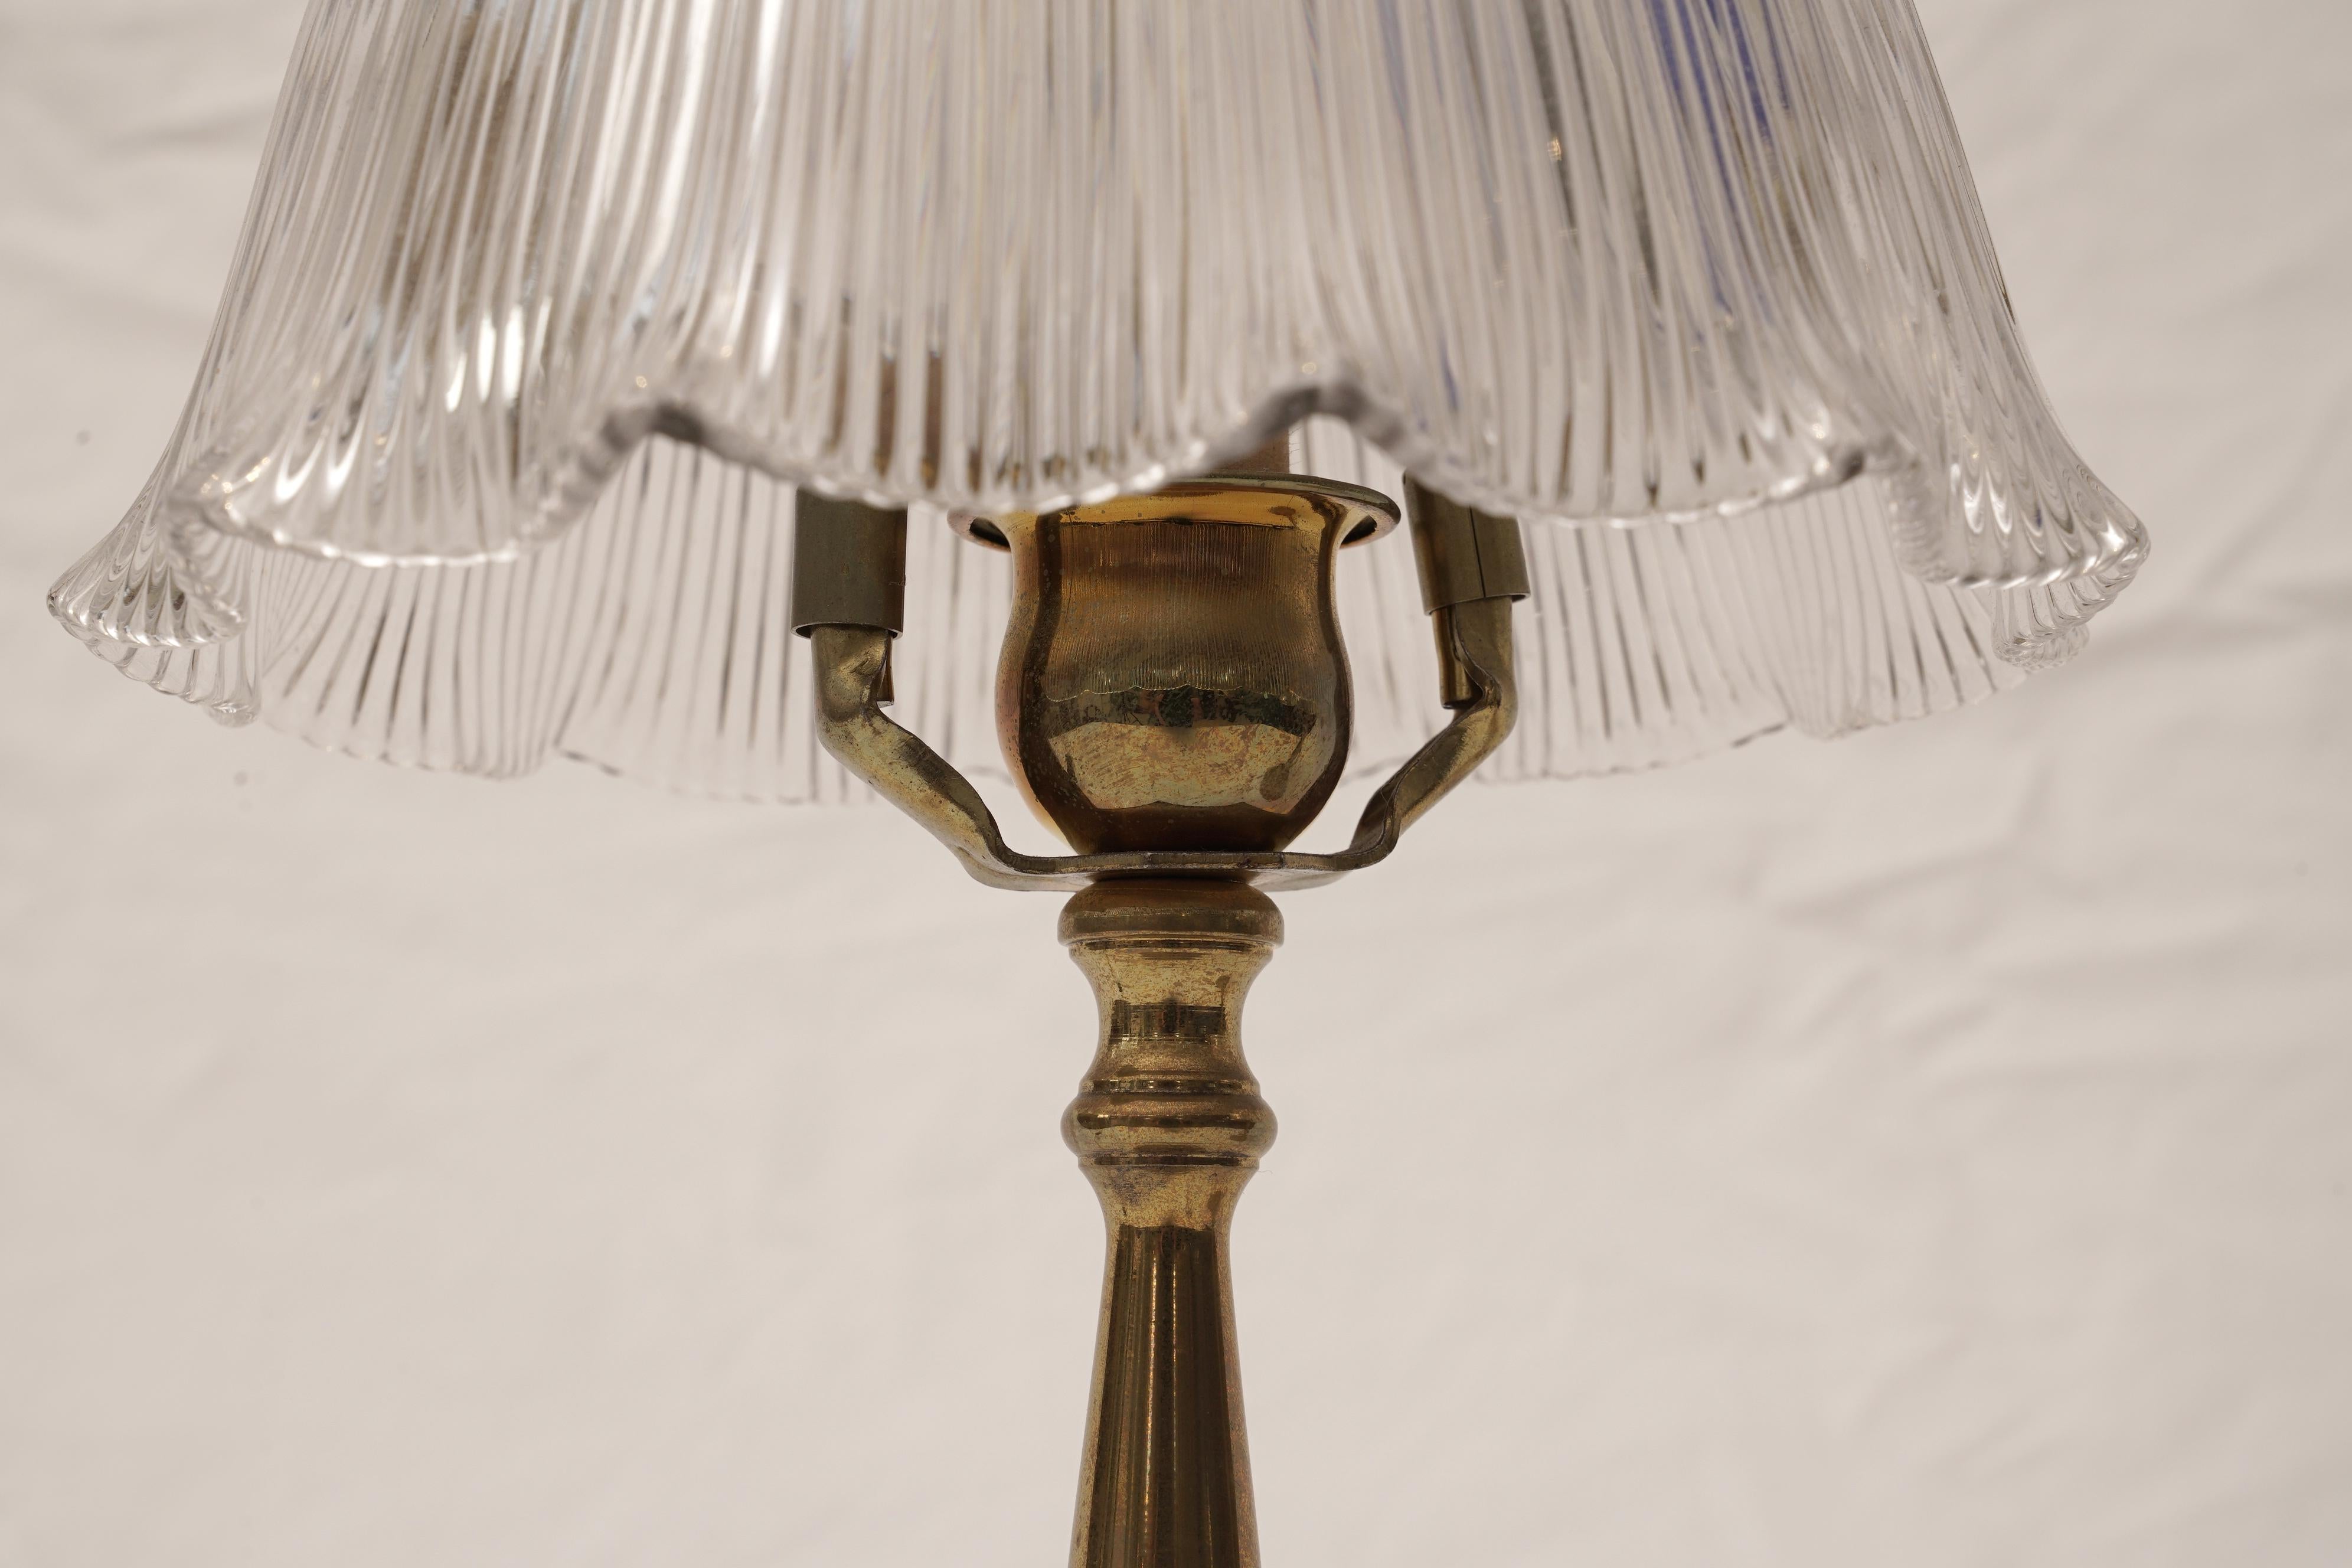 Pair of classic brass petite table lamps with signed, lead-crystal Holophane shades. Takes a candelabra base light and rewired, mid-1900s, American. Shade measures 7 inch diameter x 5 inches high. Base has 4 inch diameter and overall height is 13